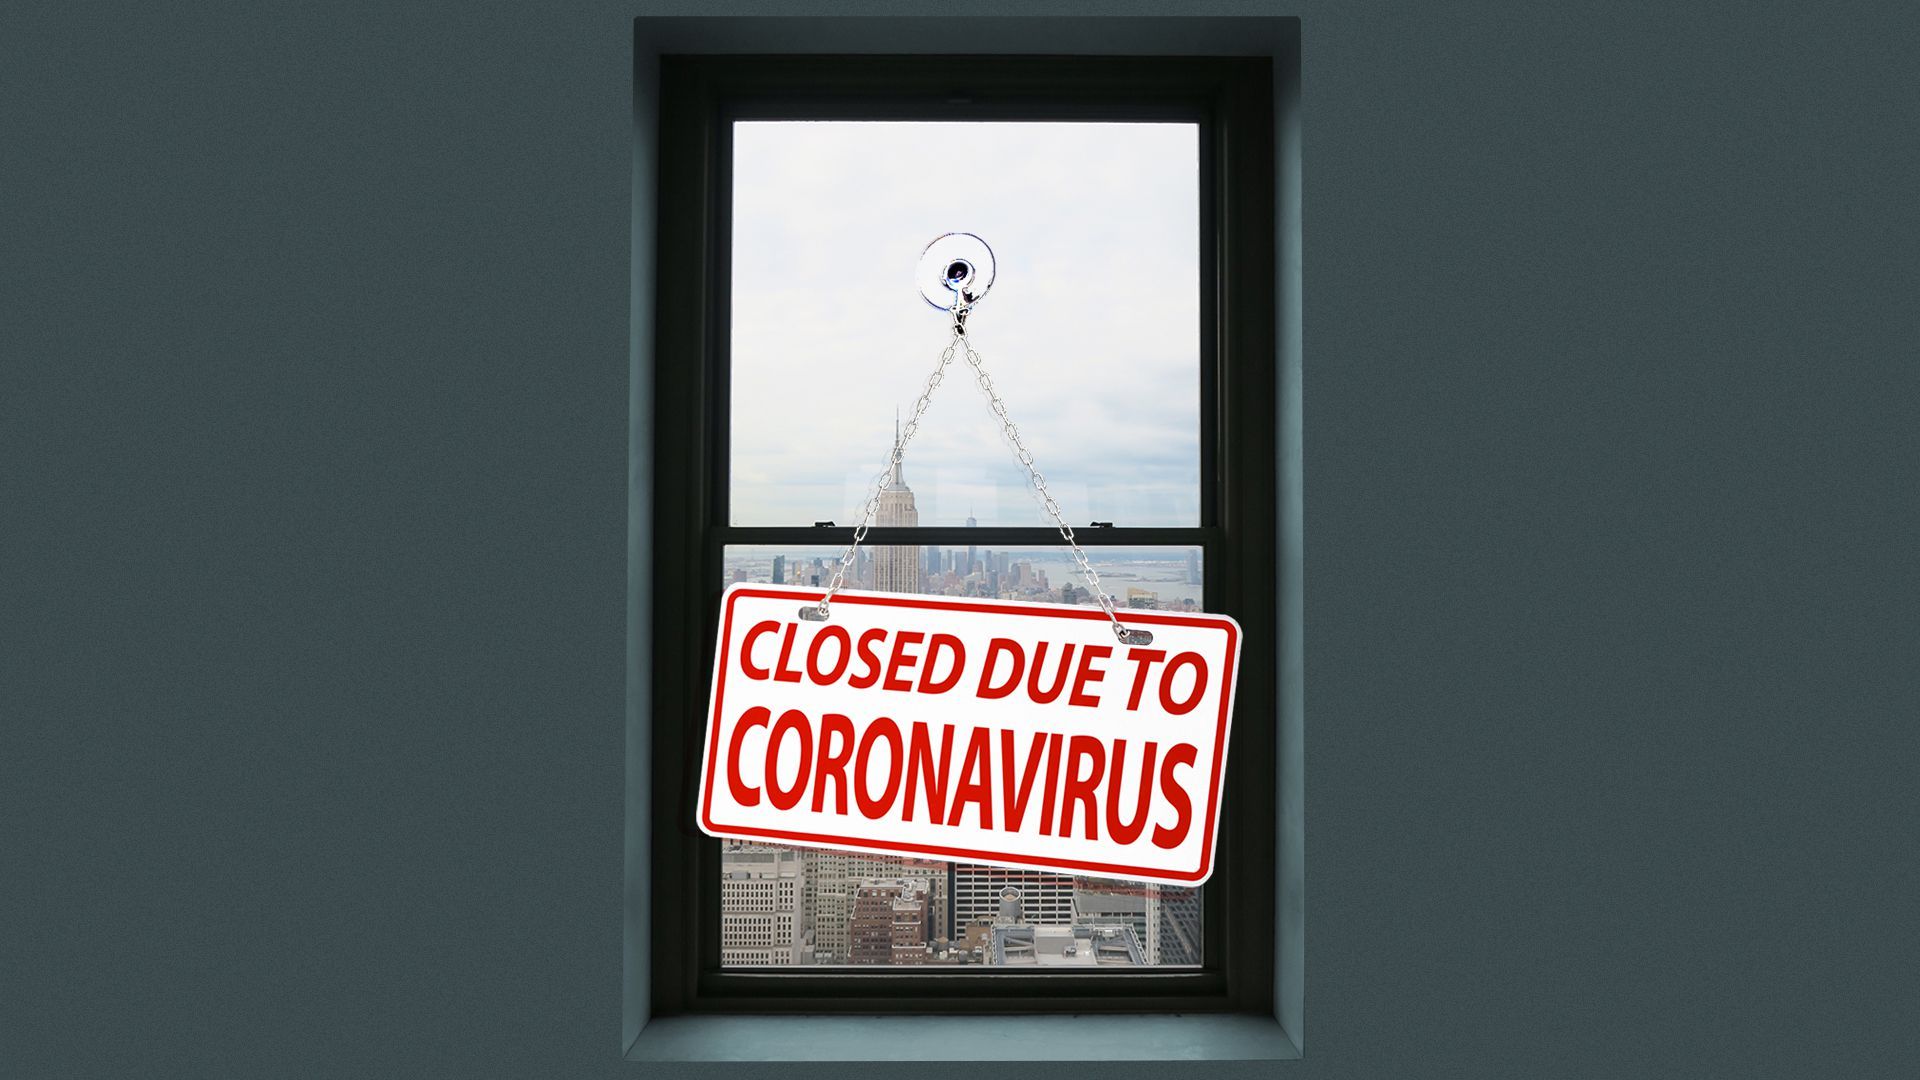 Illustration of an interior apartment window facing a cityscape with a sign reading "Closed Due to Coronavirus"